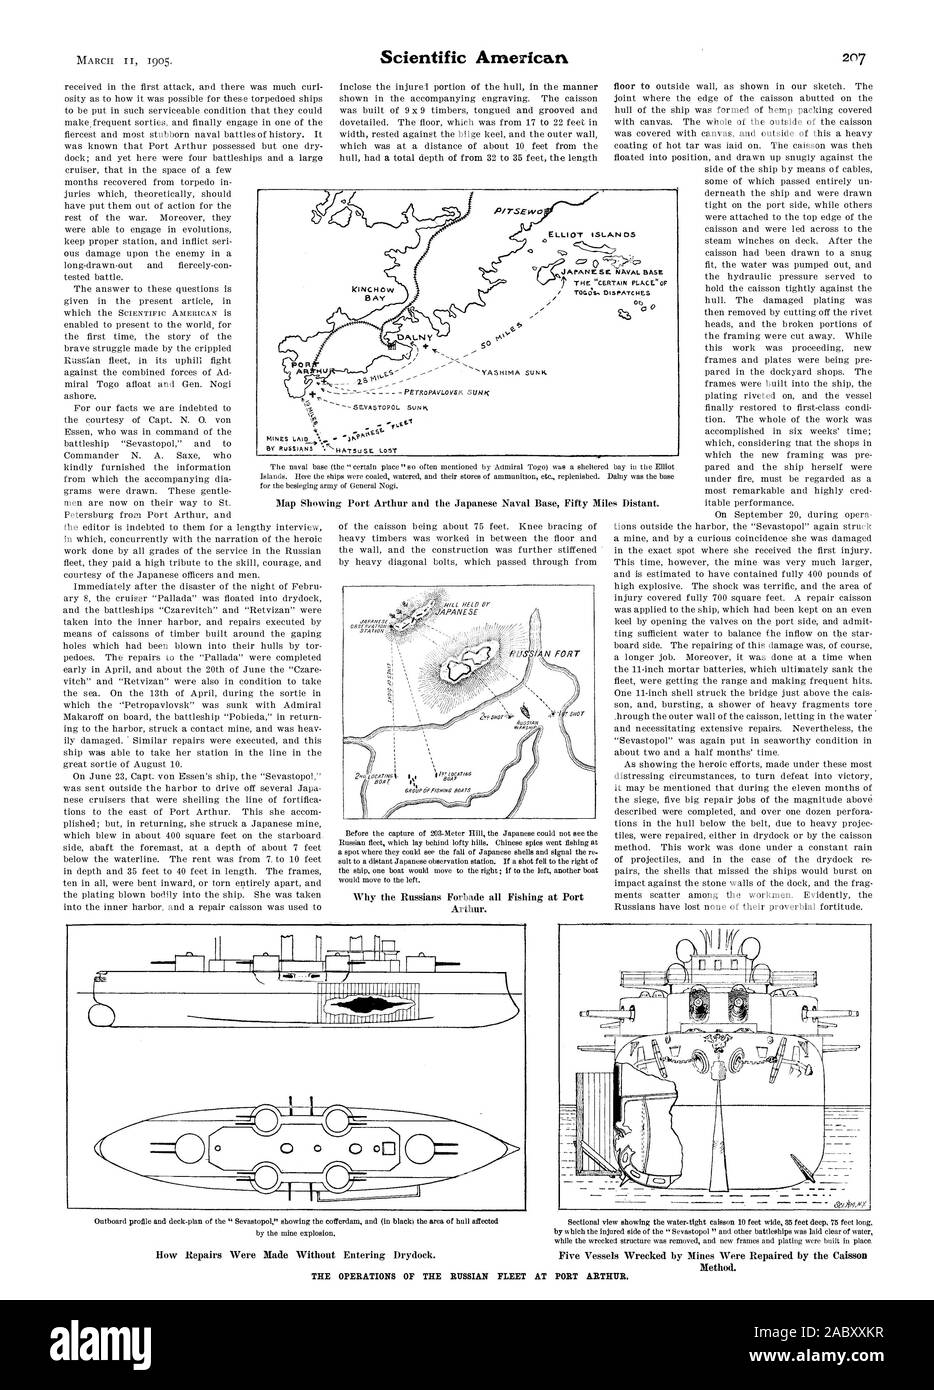 THE OPERATIONS OF THE RUSSIAN FLEET AT PORT ARTHUR., scientific american, 1905-03-11 Stock Photo